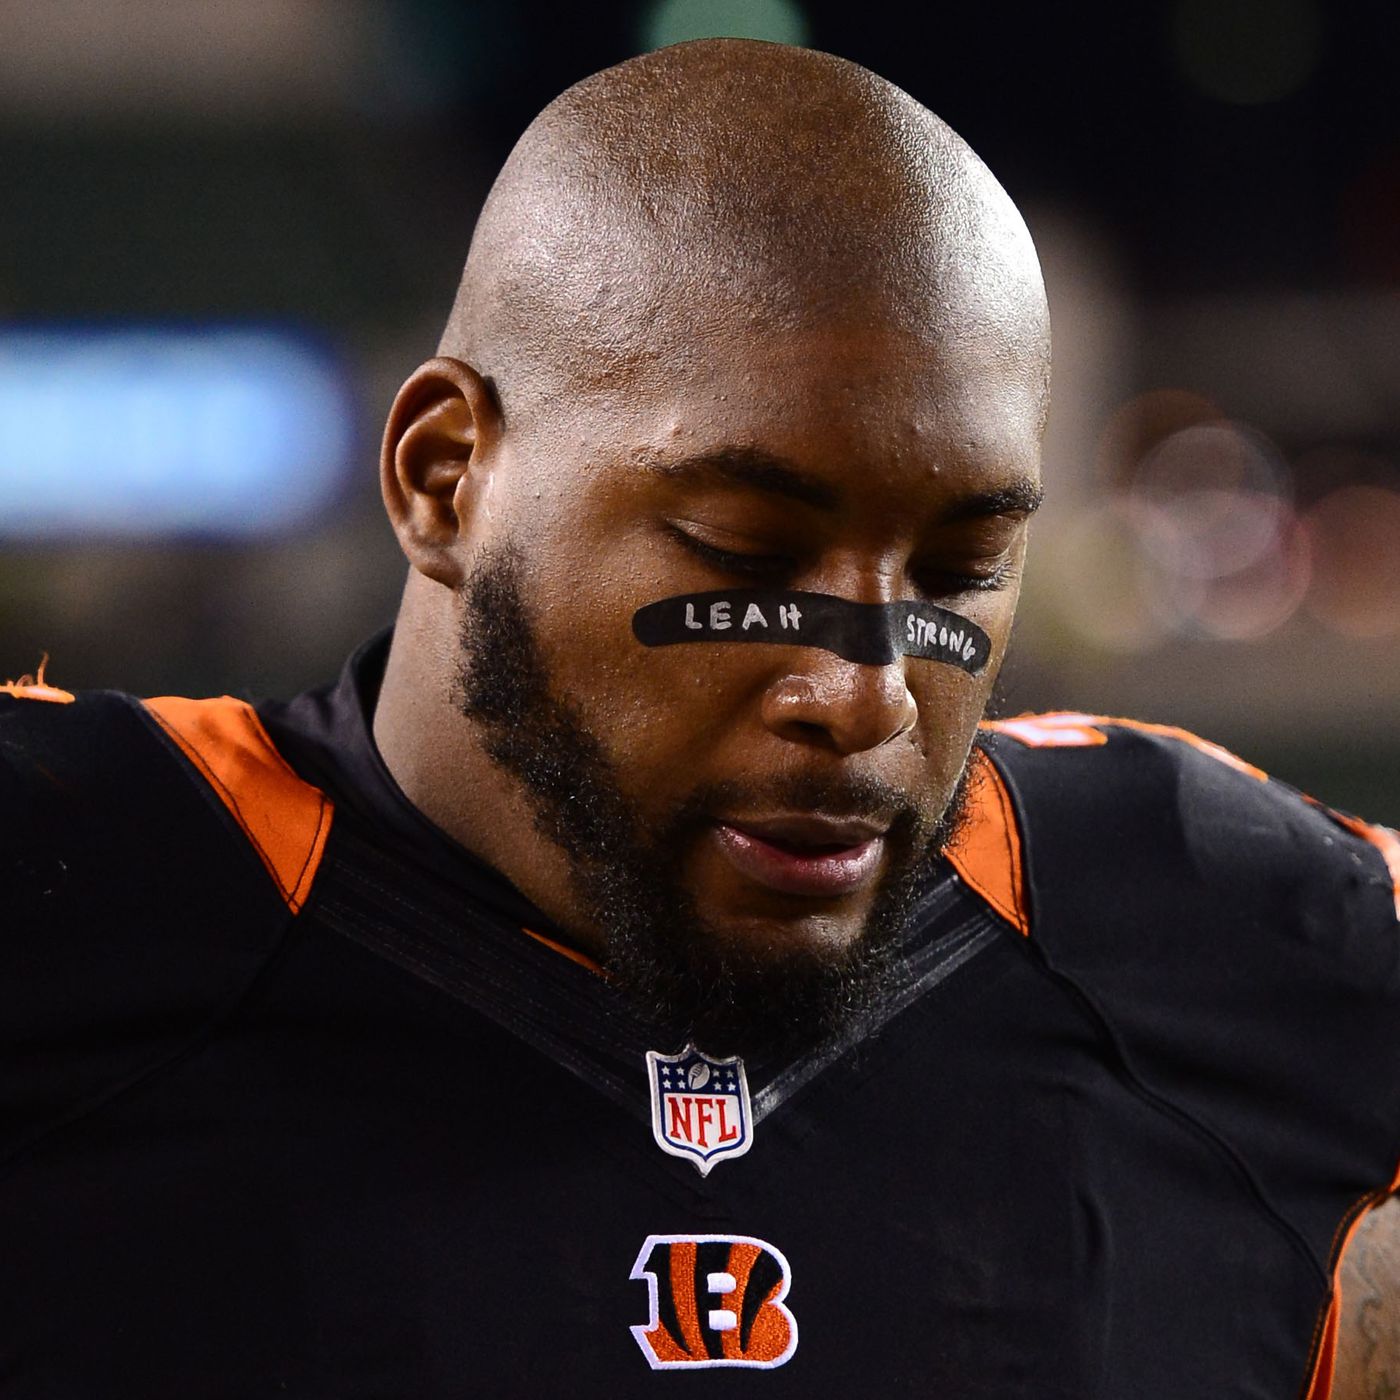 Devon Still and Leah's mother reach child support agreement - Cincy Jungle